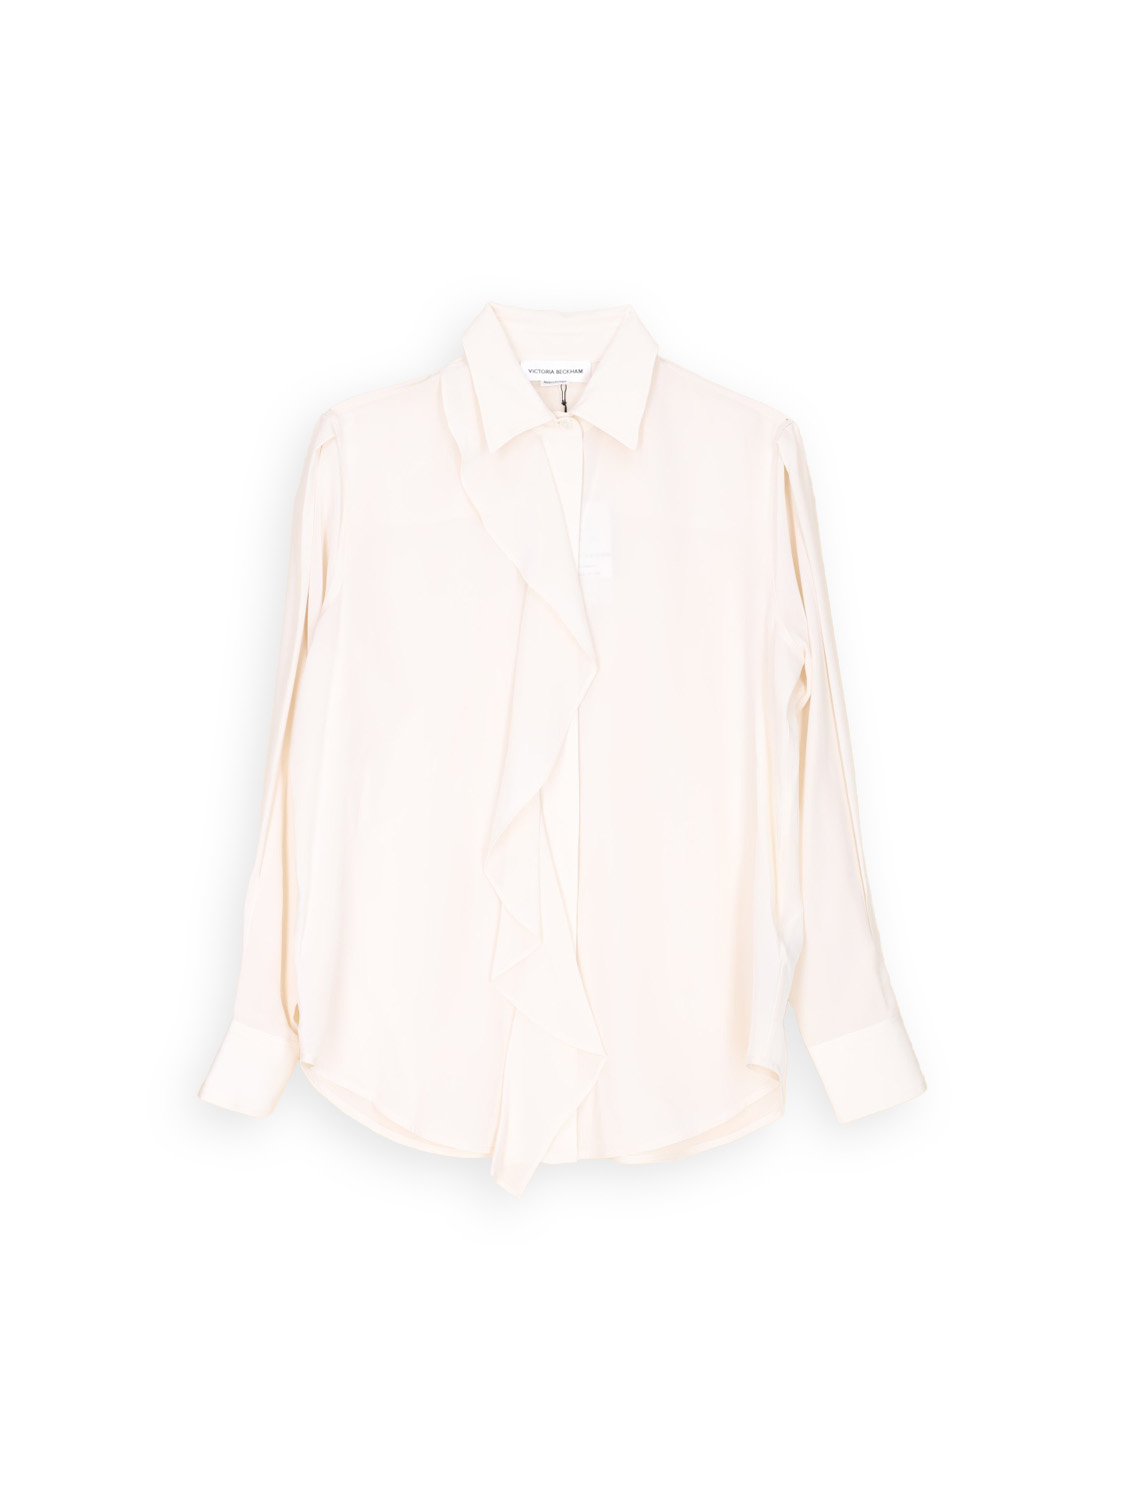 Victoria Beckham Blouse with ruffle detail  beige 34